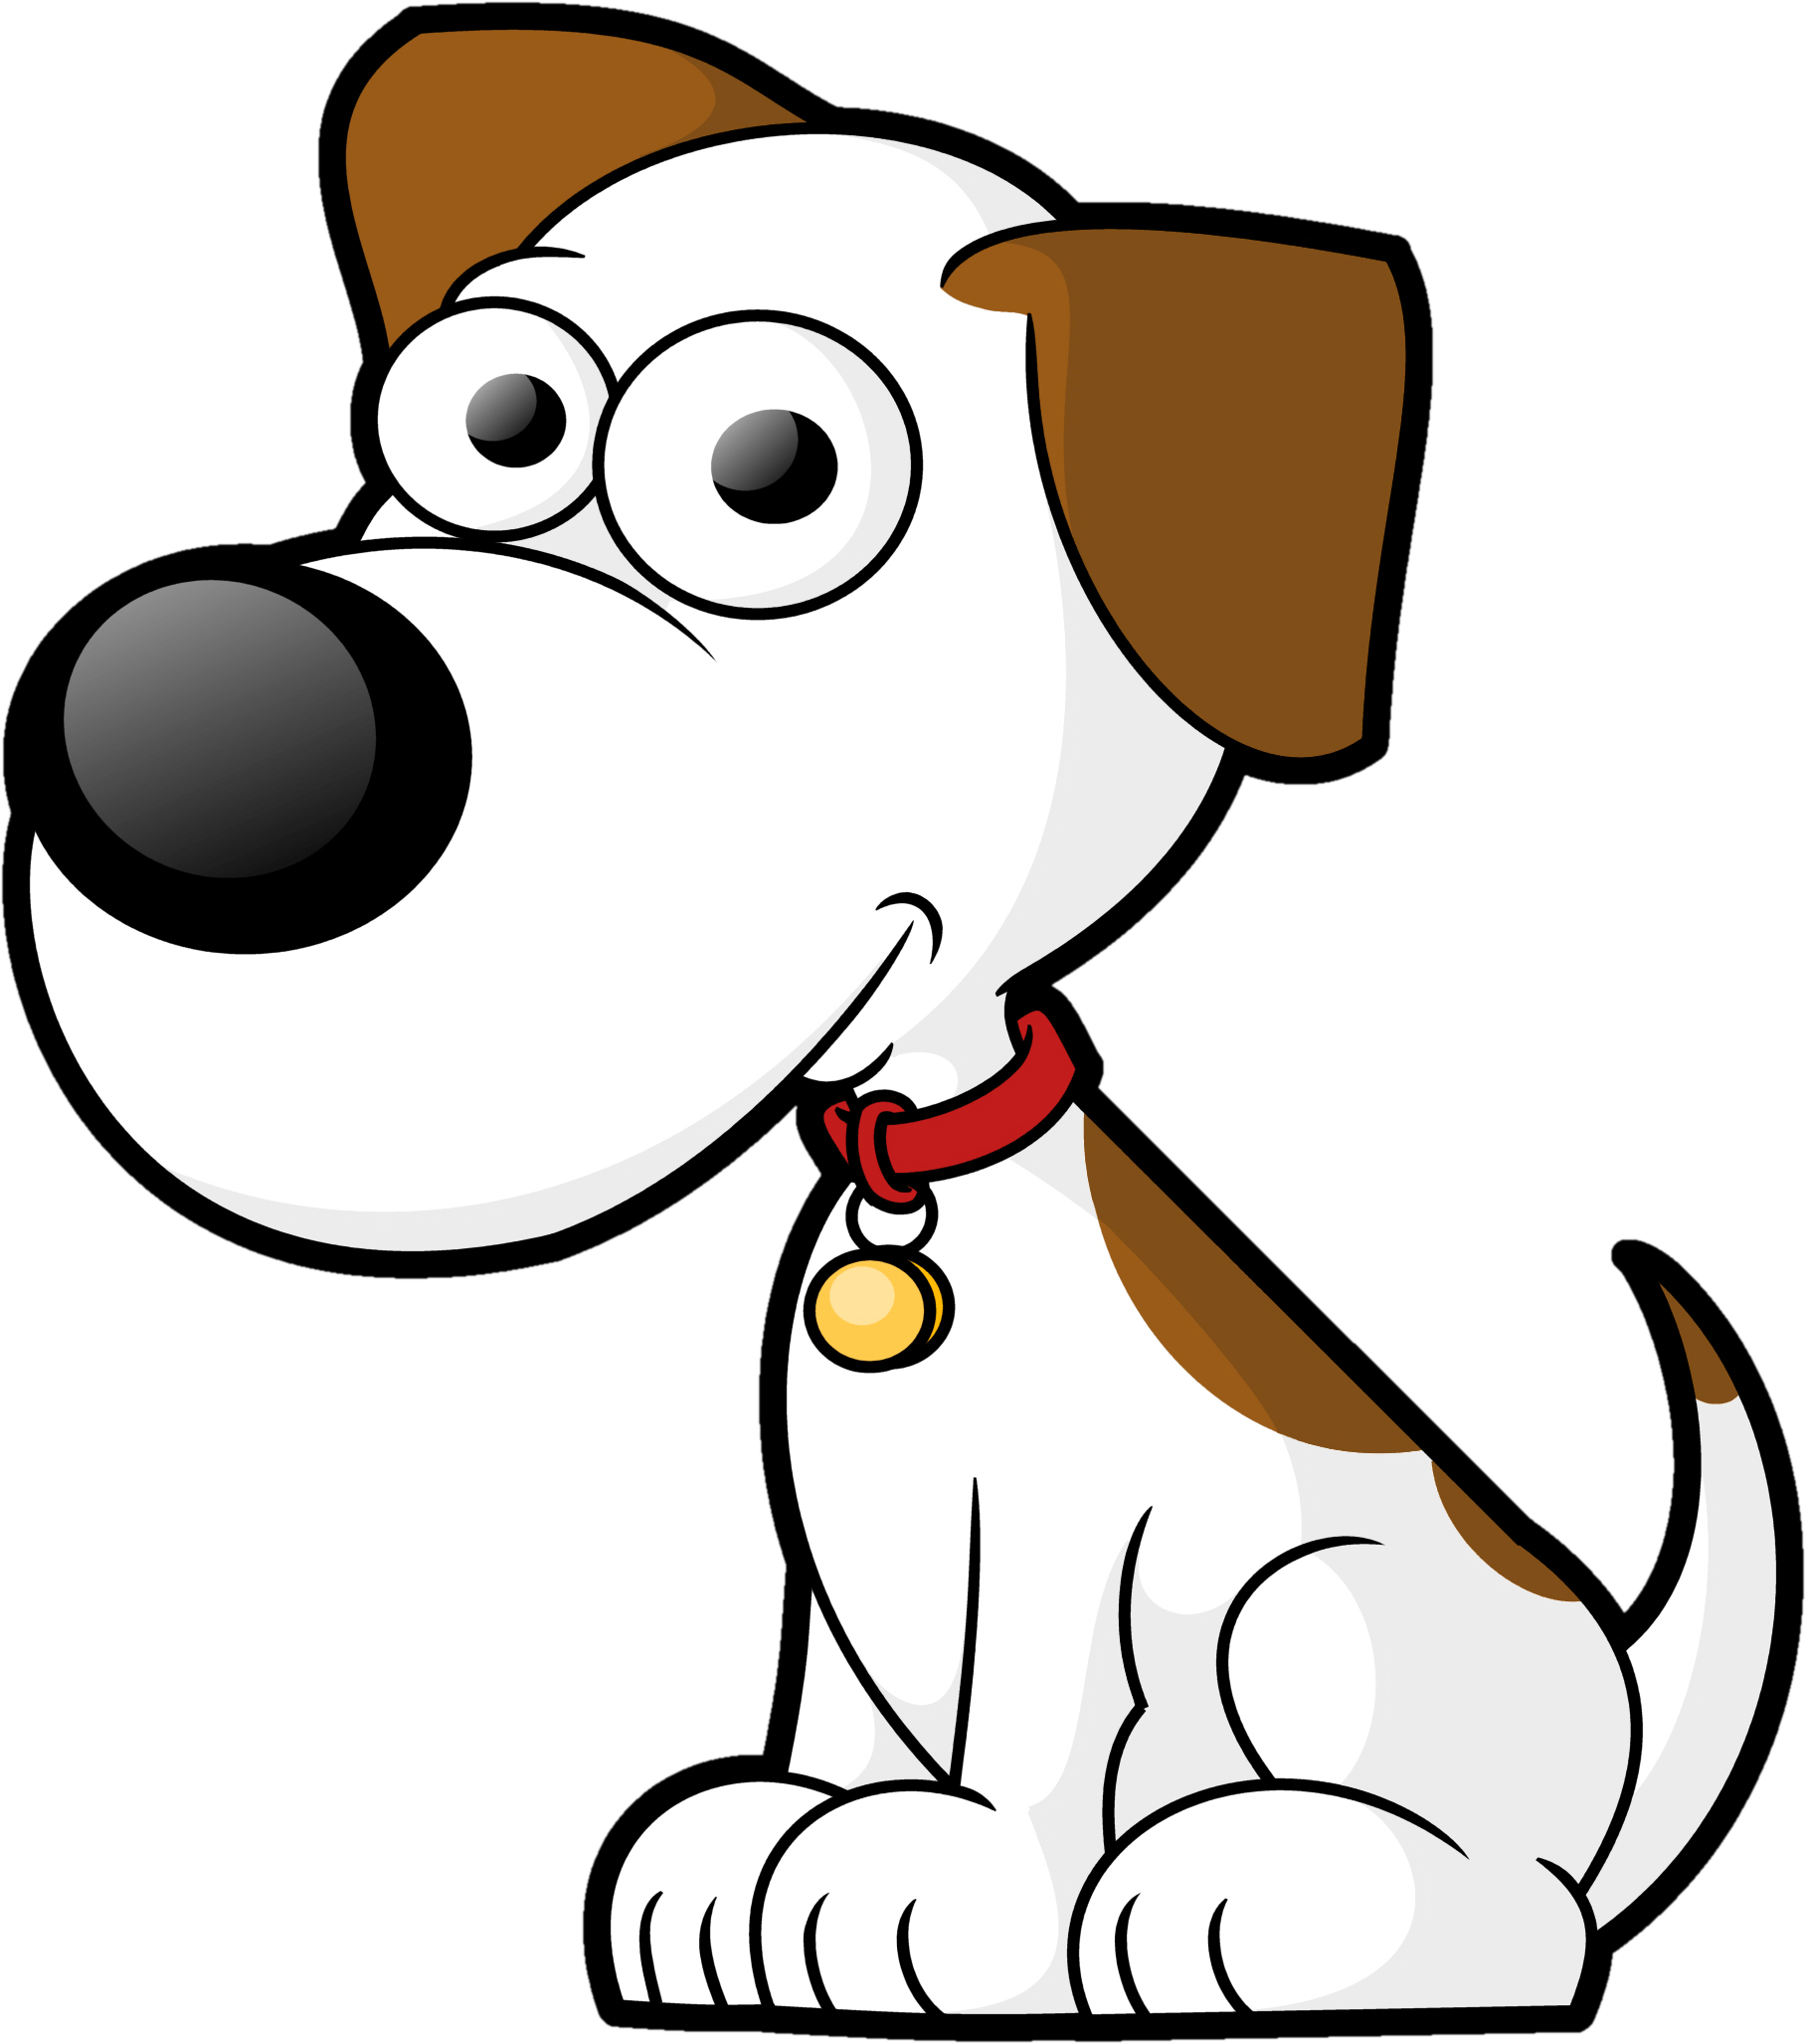 Nine peeves dogs have. Clipart dog vet